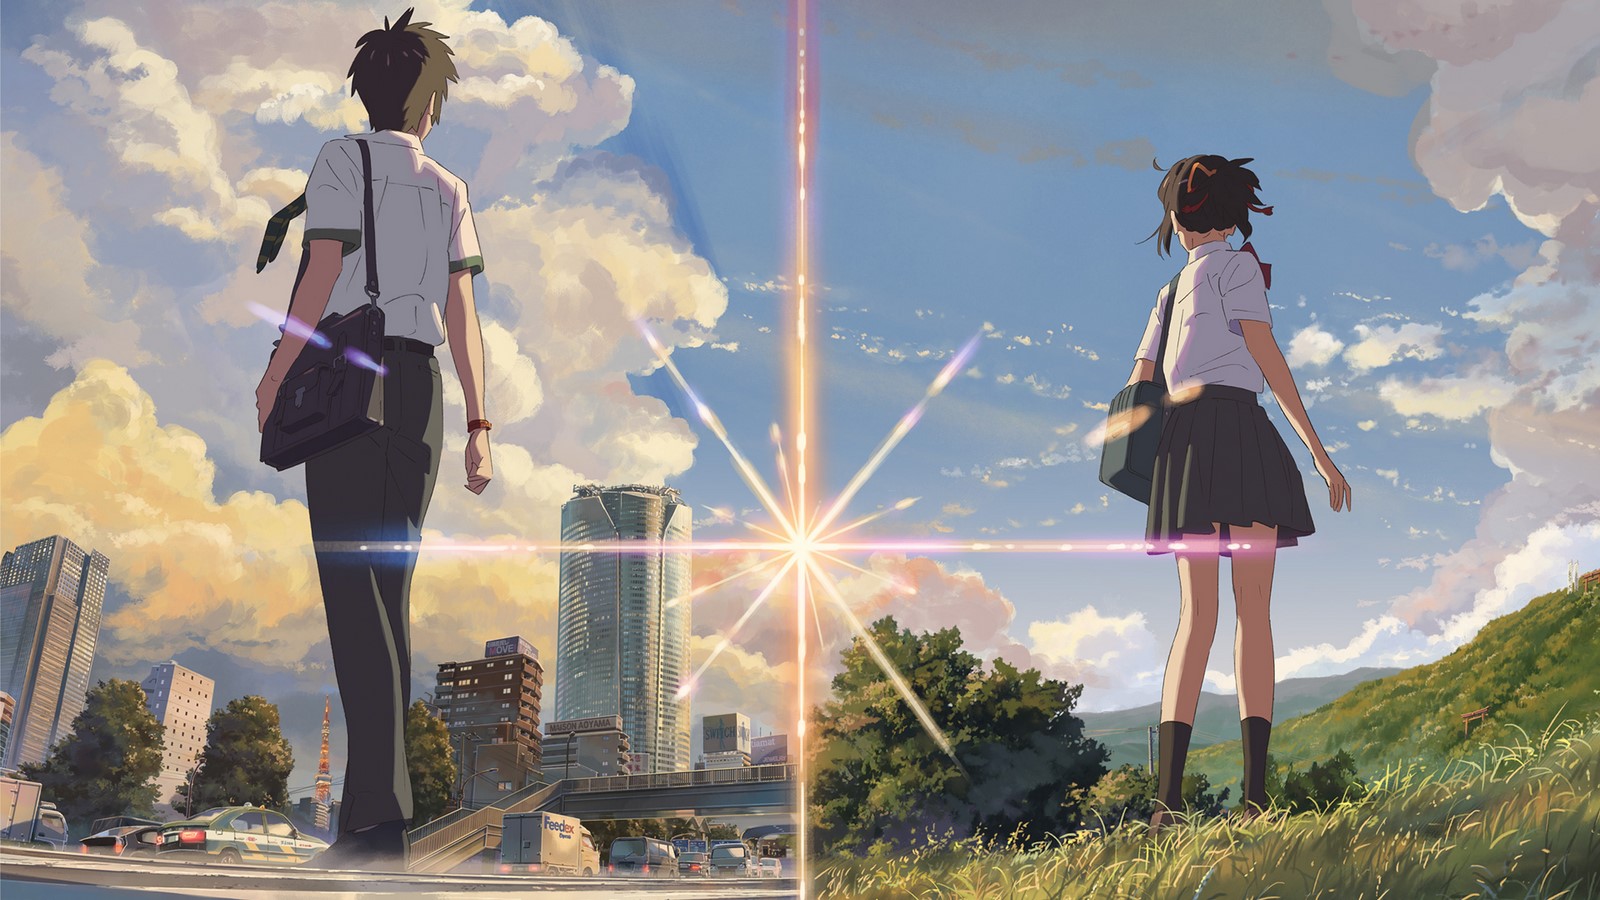 An Architectural review of The Worlds of Kimi No Nawa - Sheet2